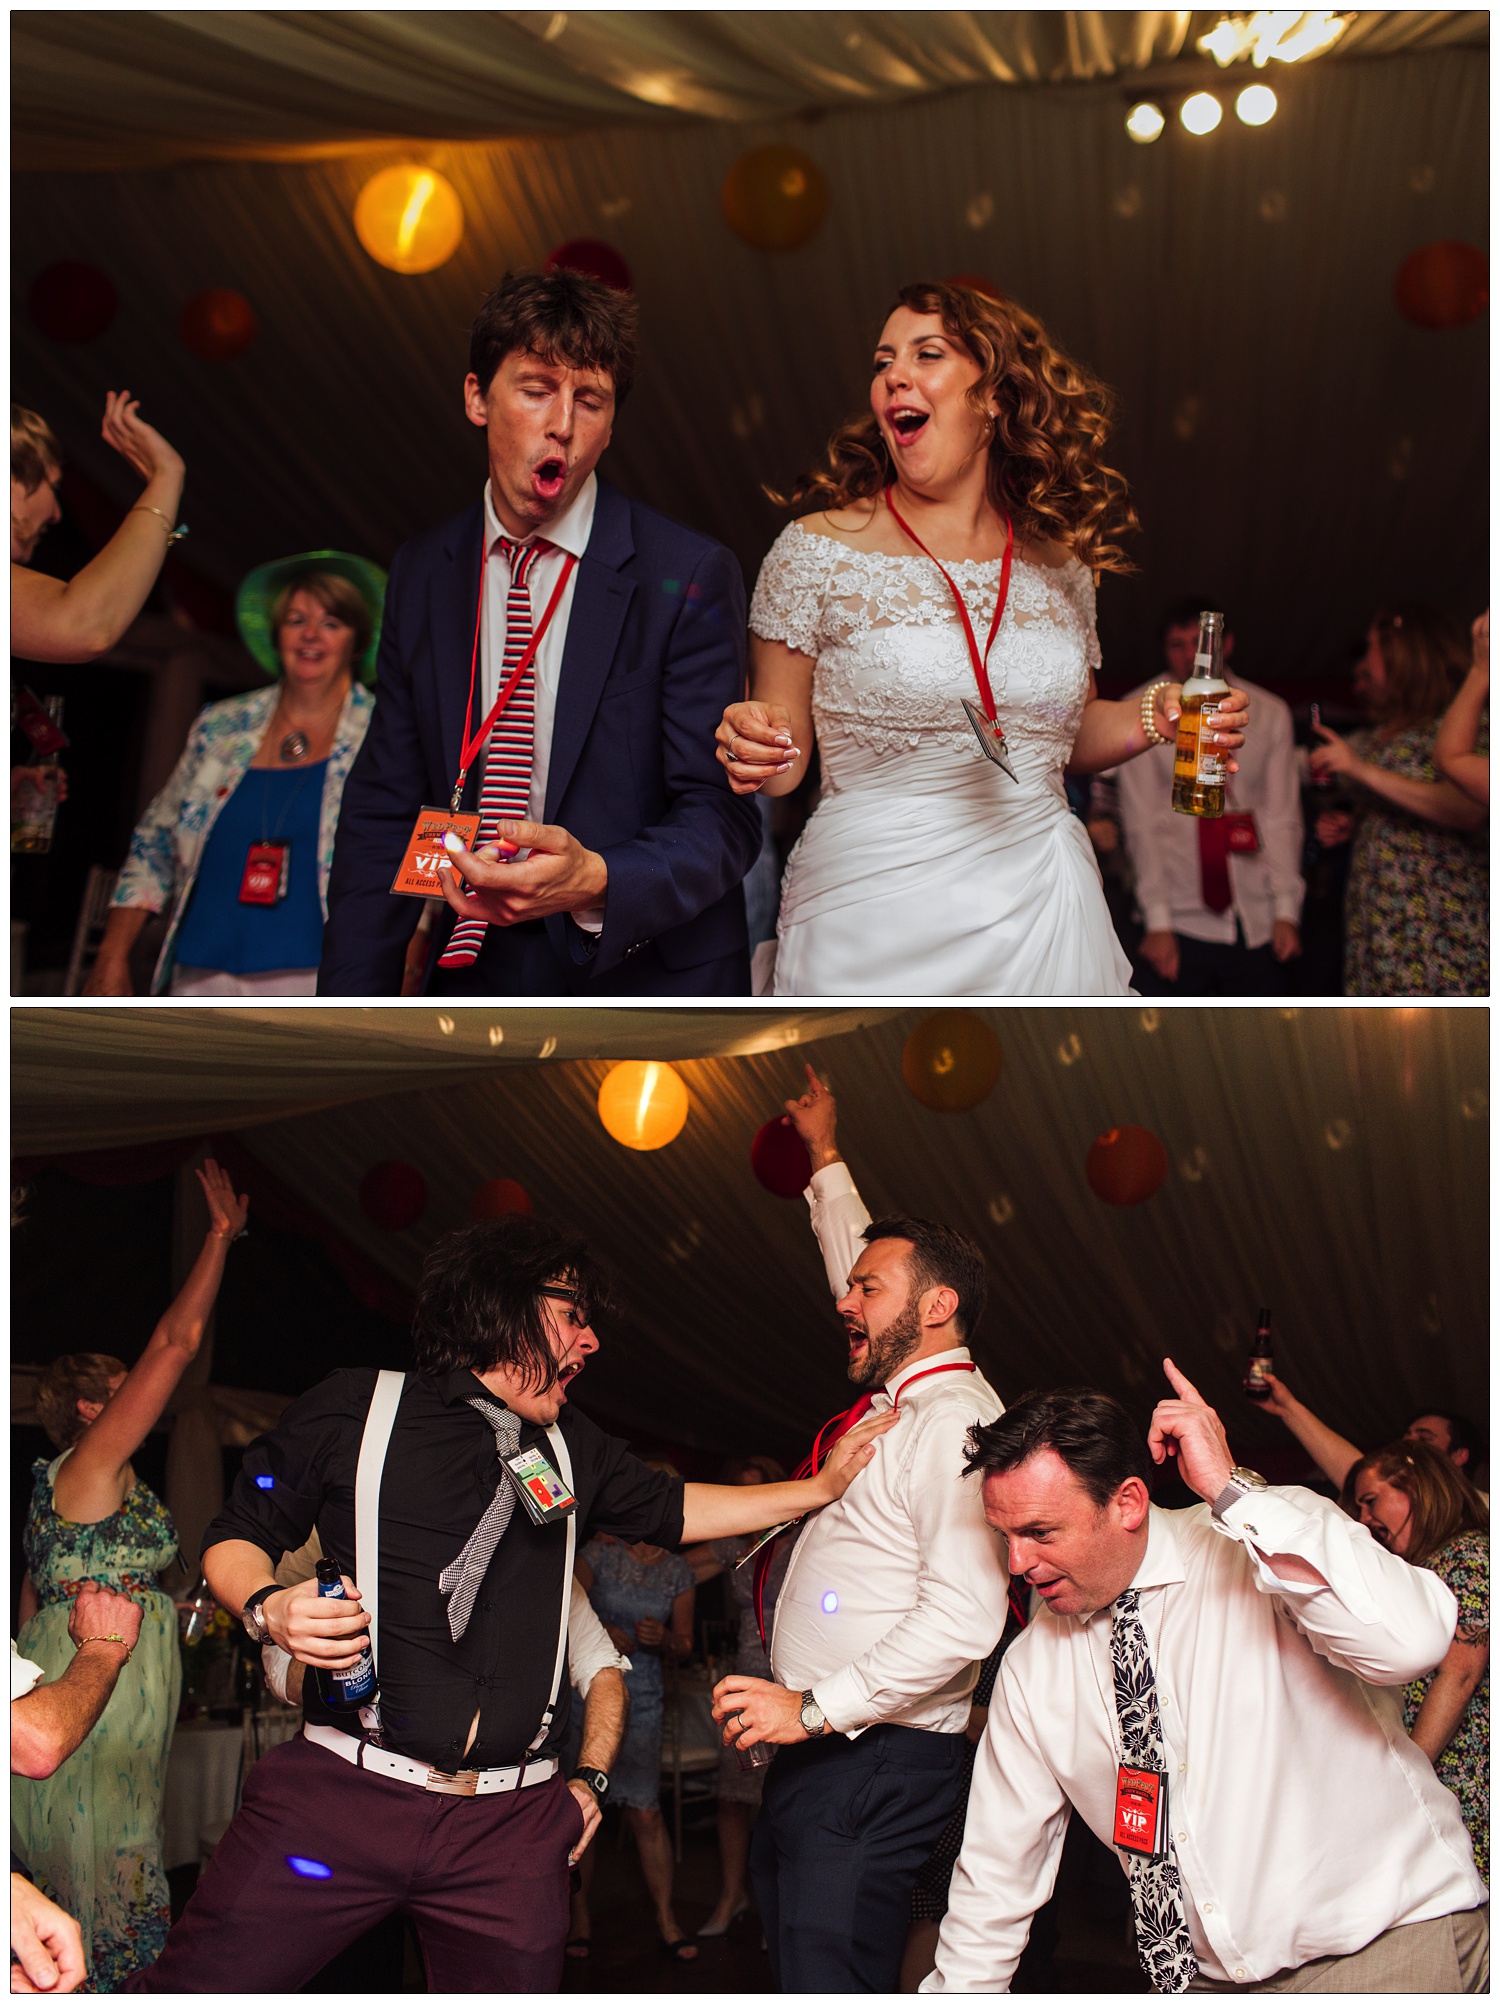 Enthusiastic dancing in a marquee at a festival themed wedding. Men are pointing in the air and singing.